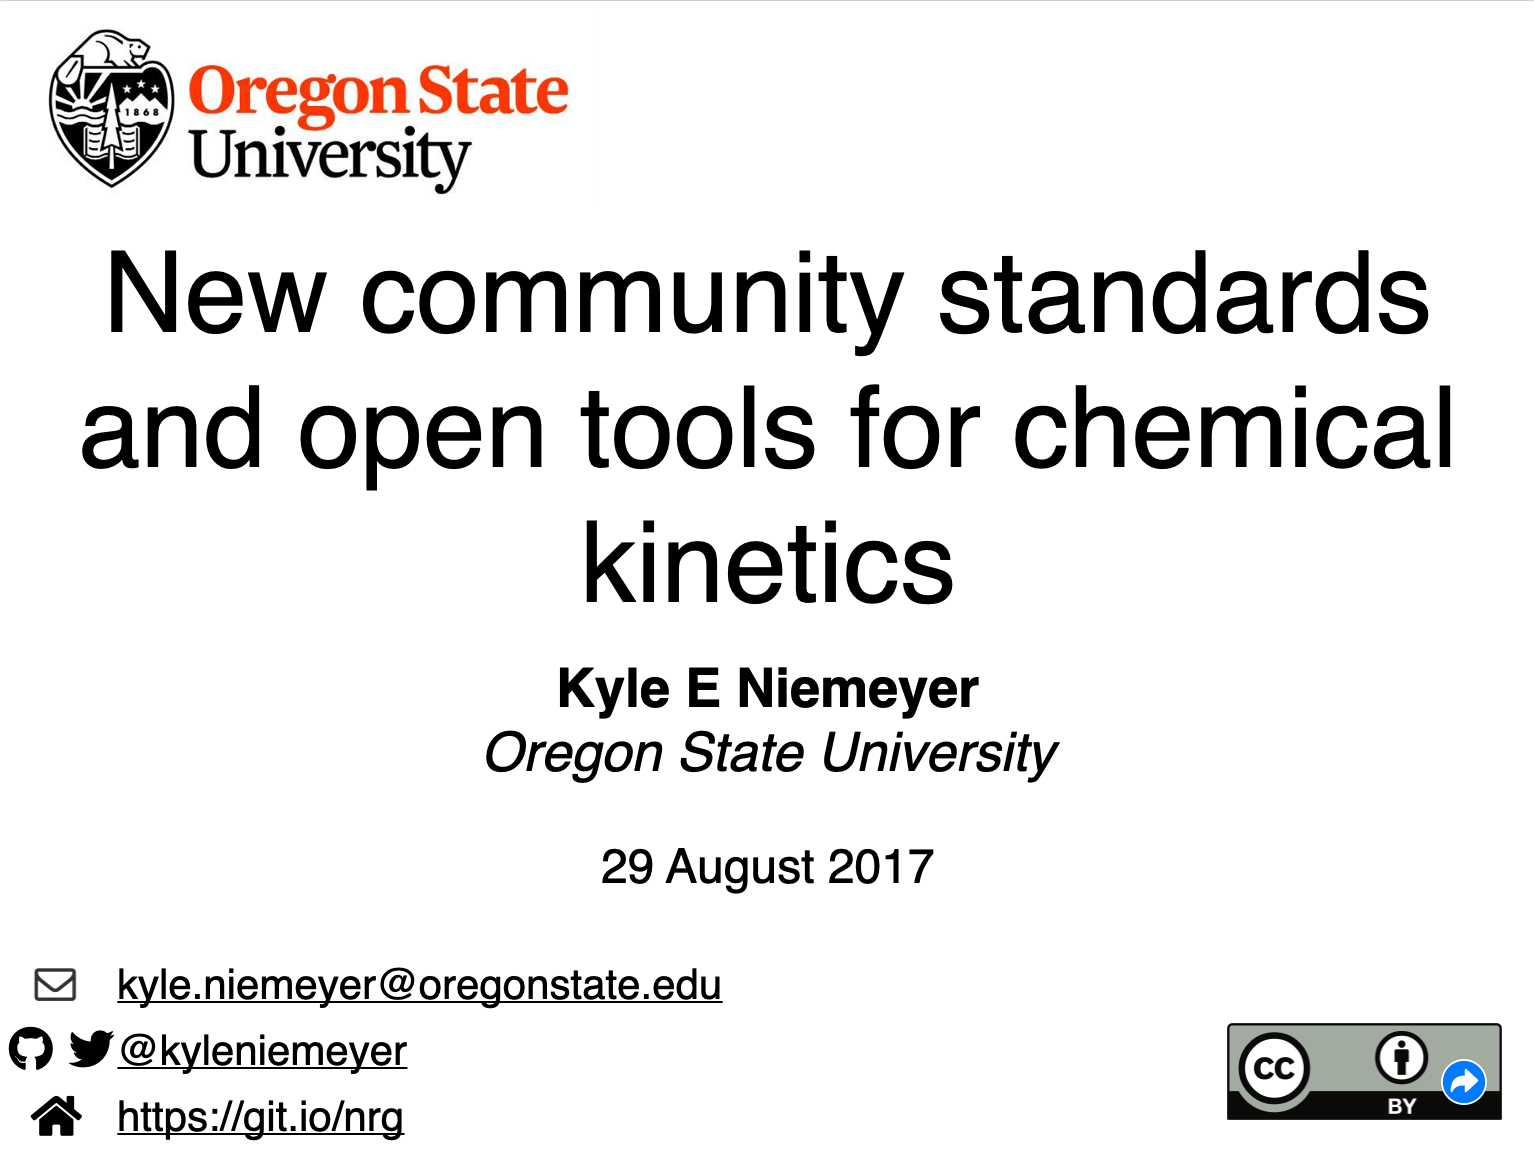 Title slide, that says 'New community standards and open tools for chemical kinetics'.